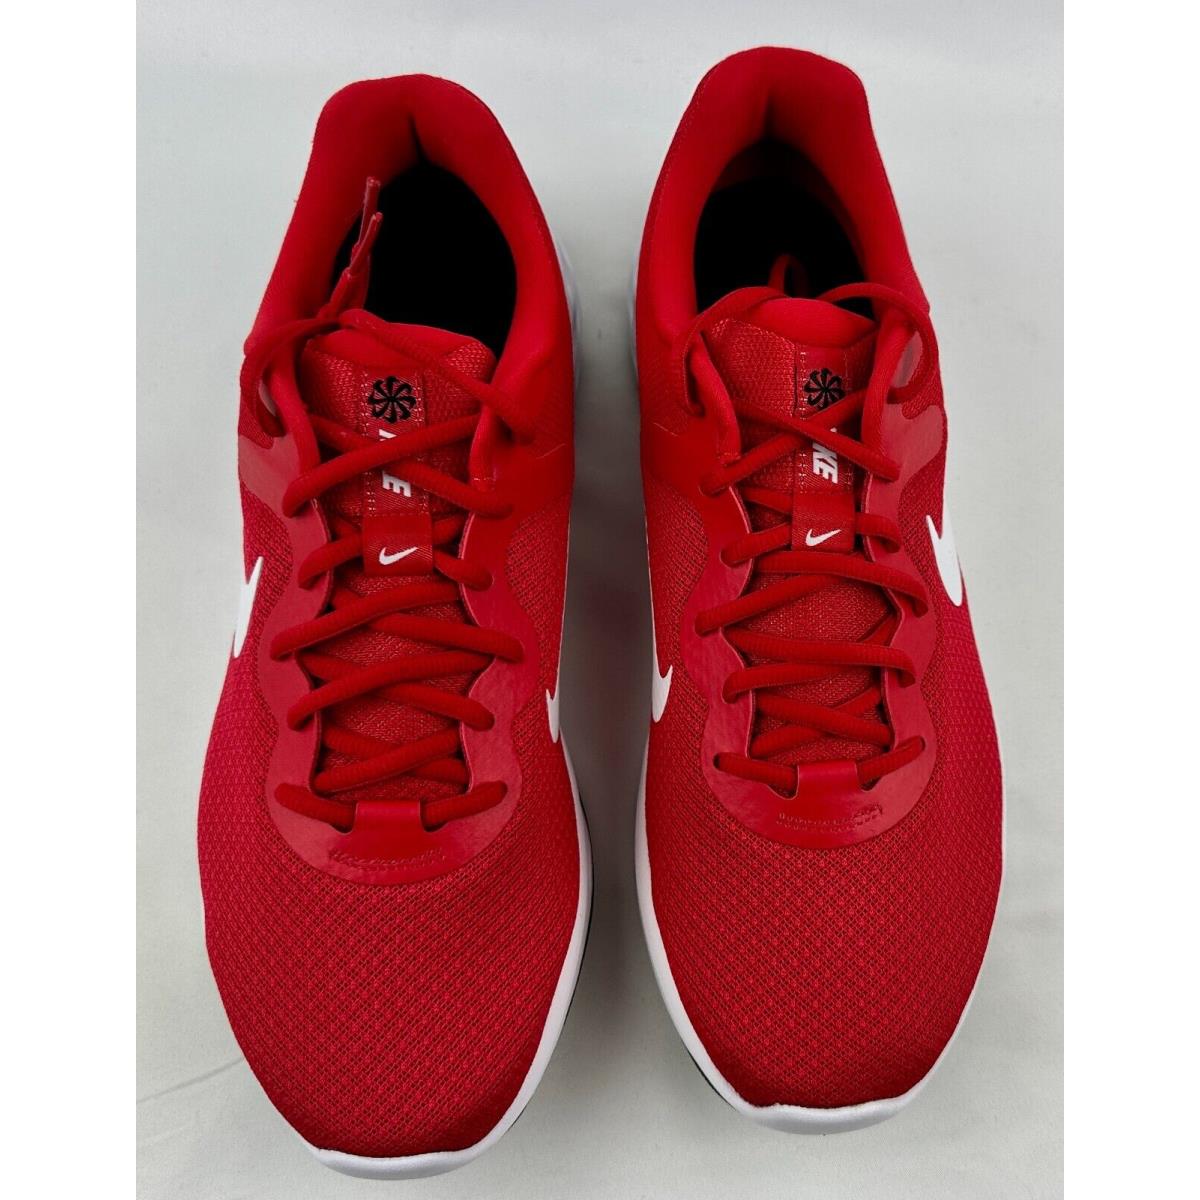 Nike shoes  - Red 2